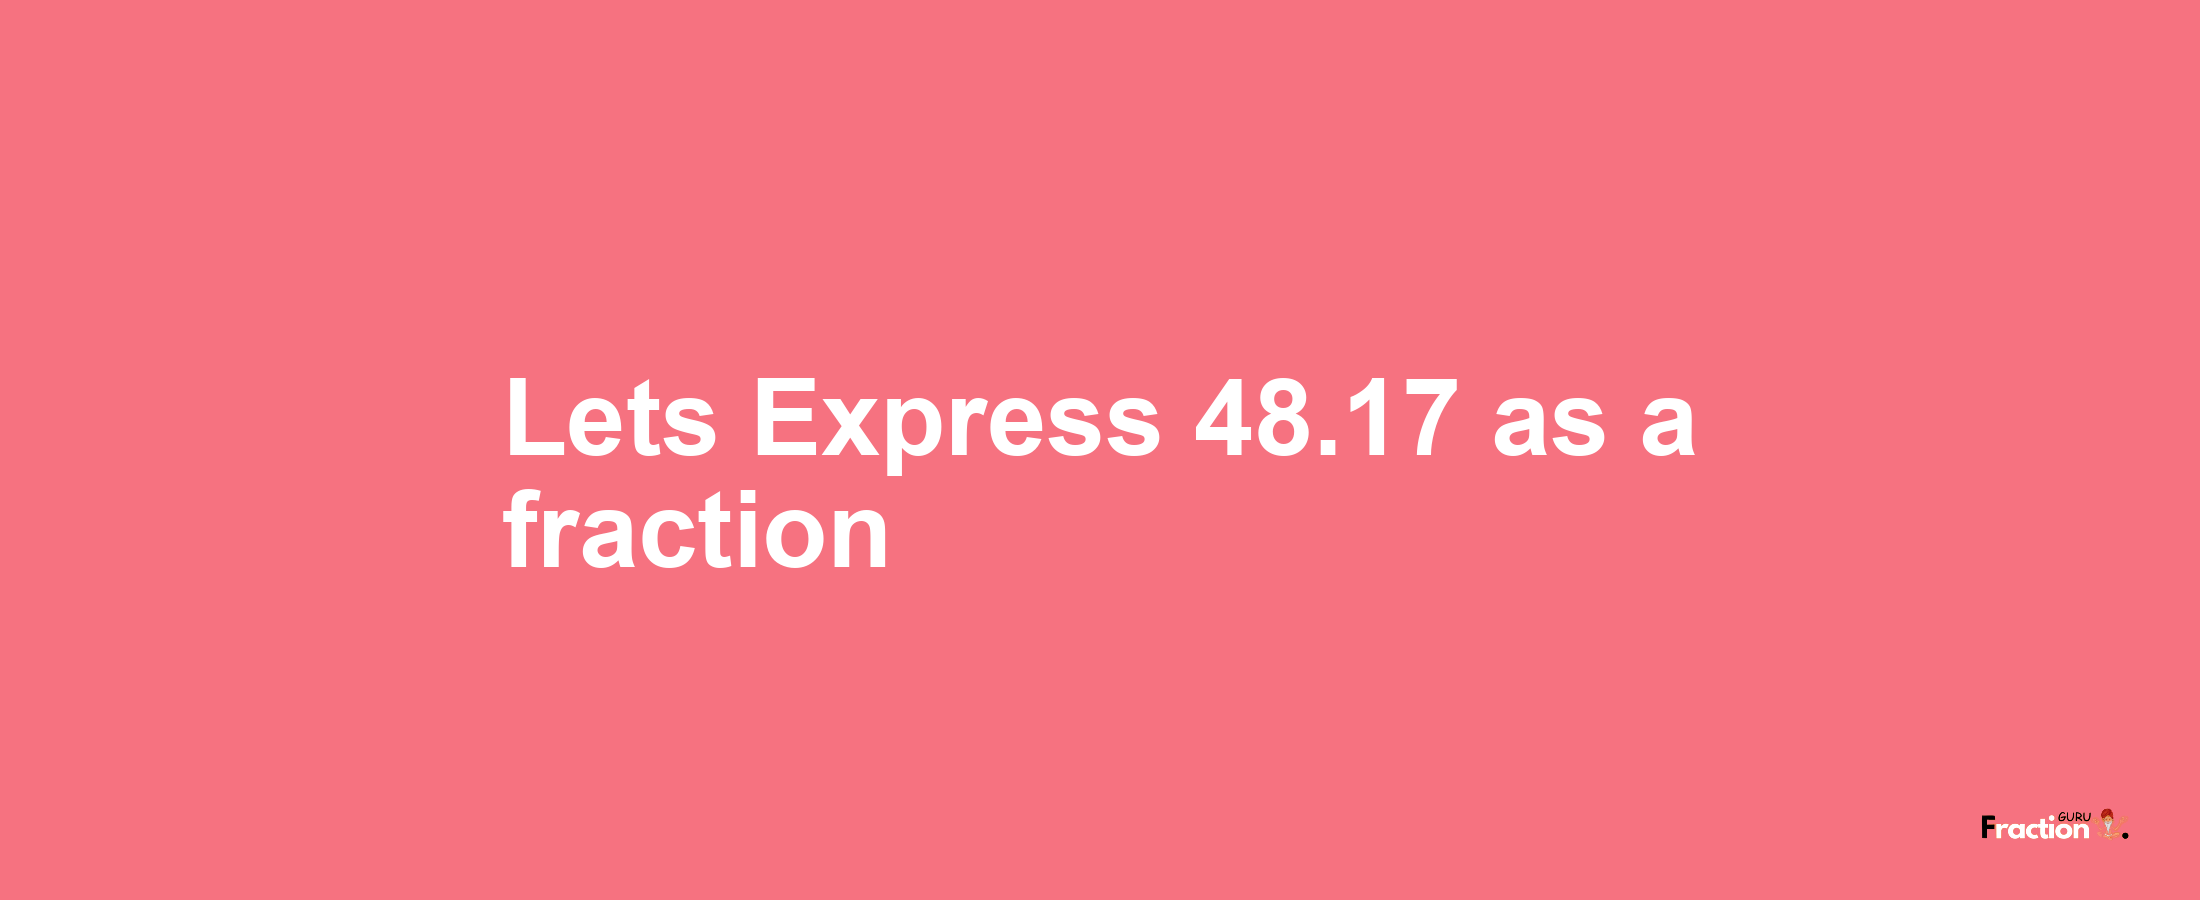 Lets Express 48.17 as afraction